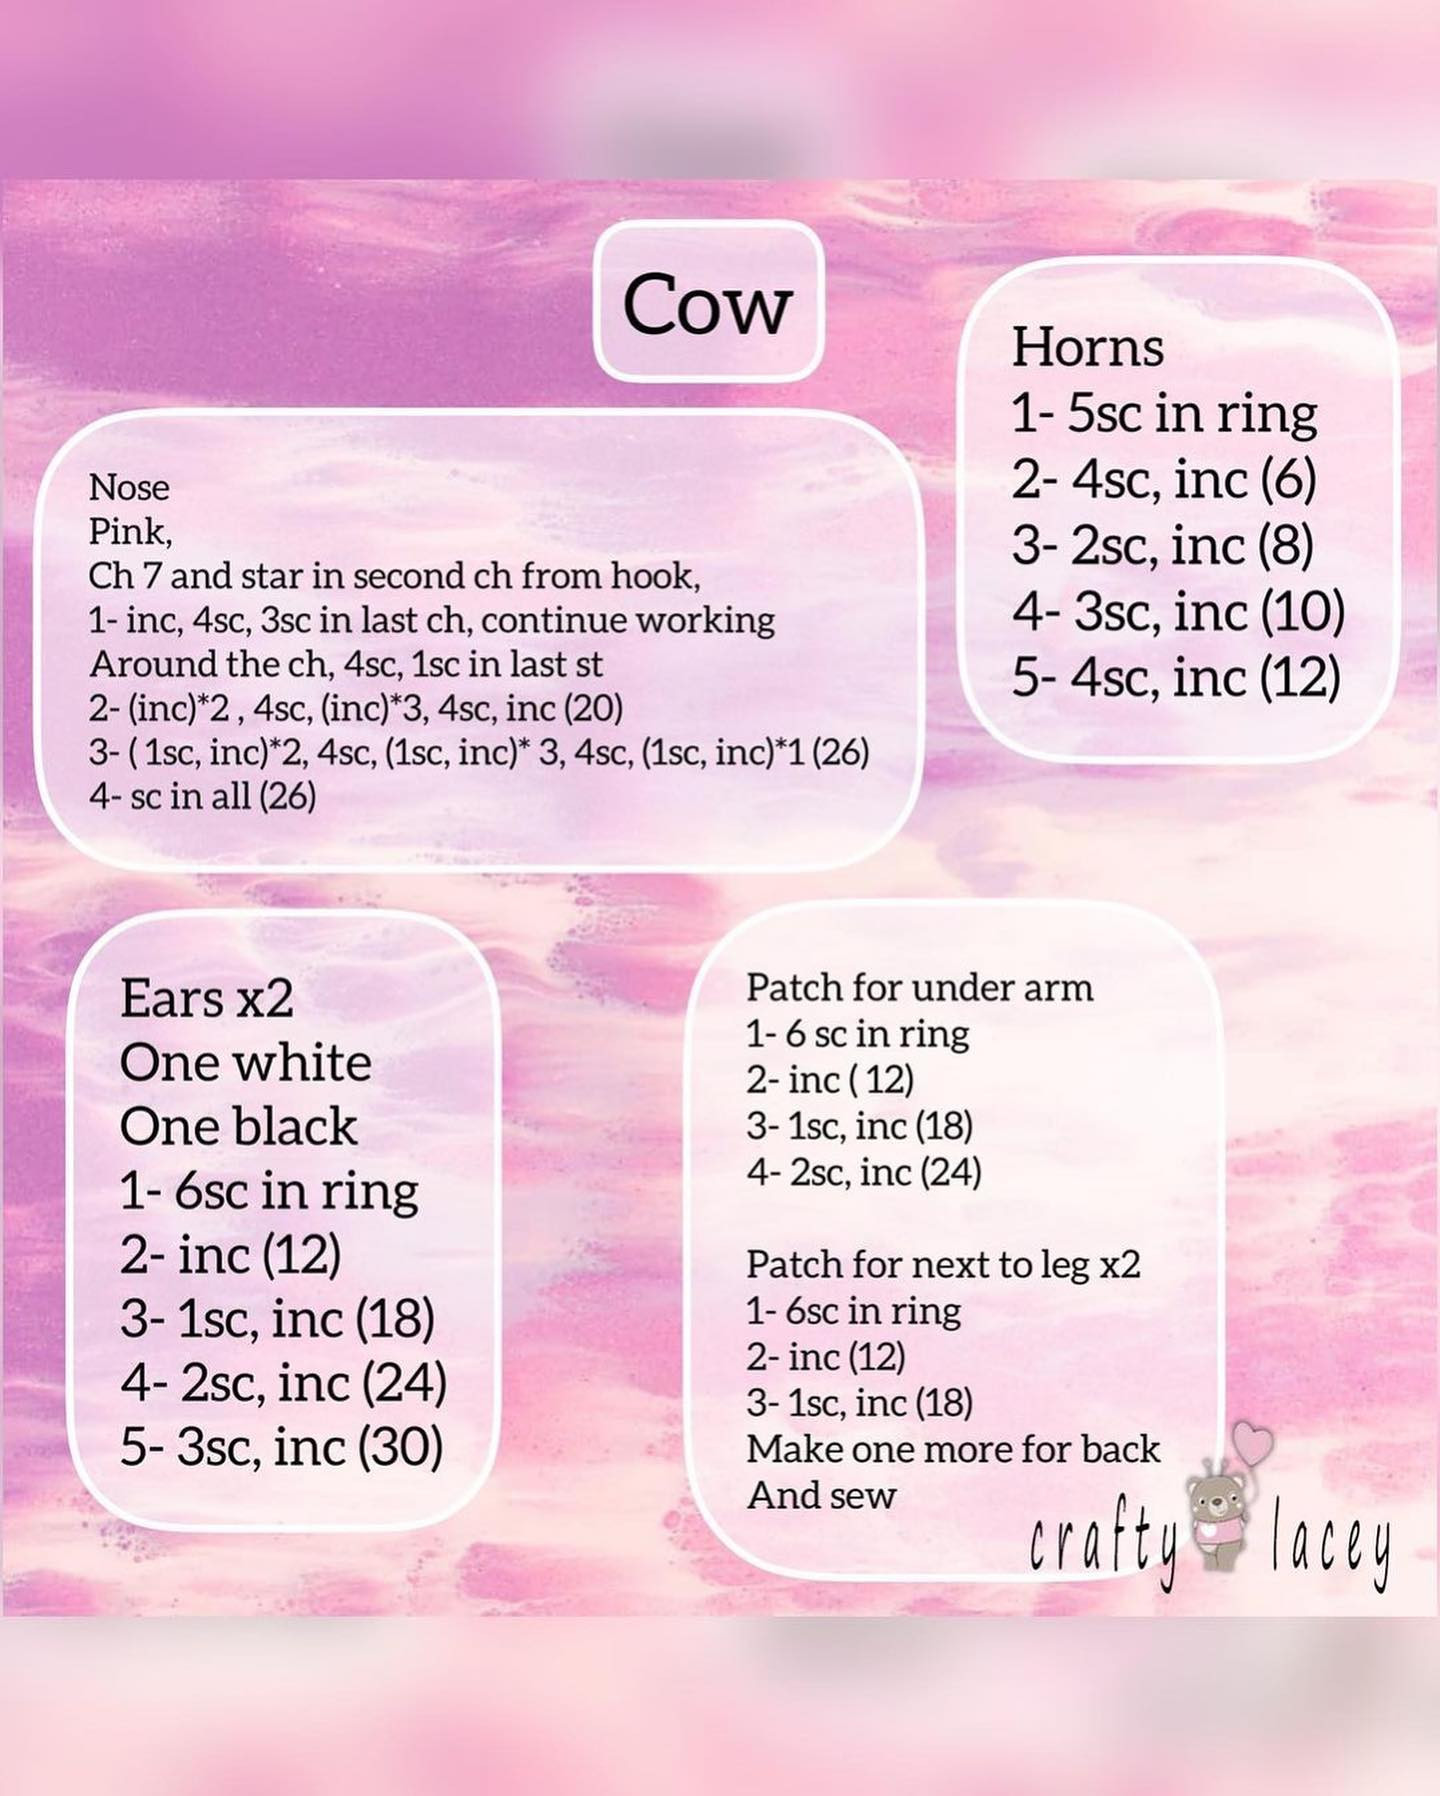 The cow is white, pink muzzle, black spots.